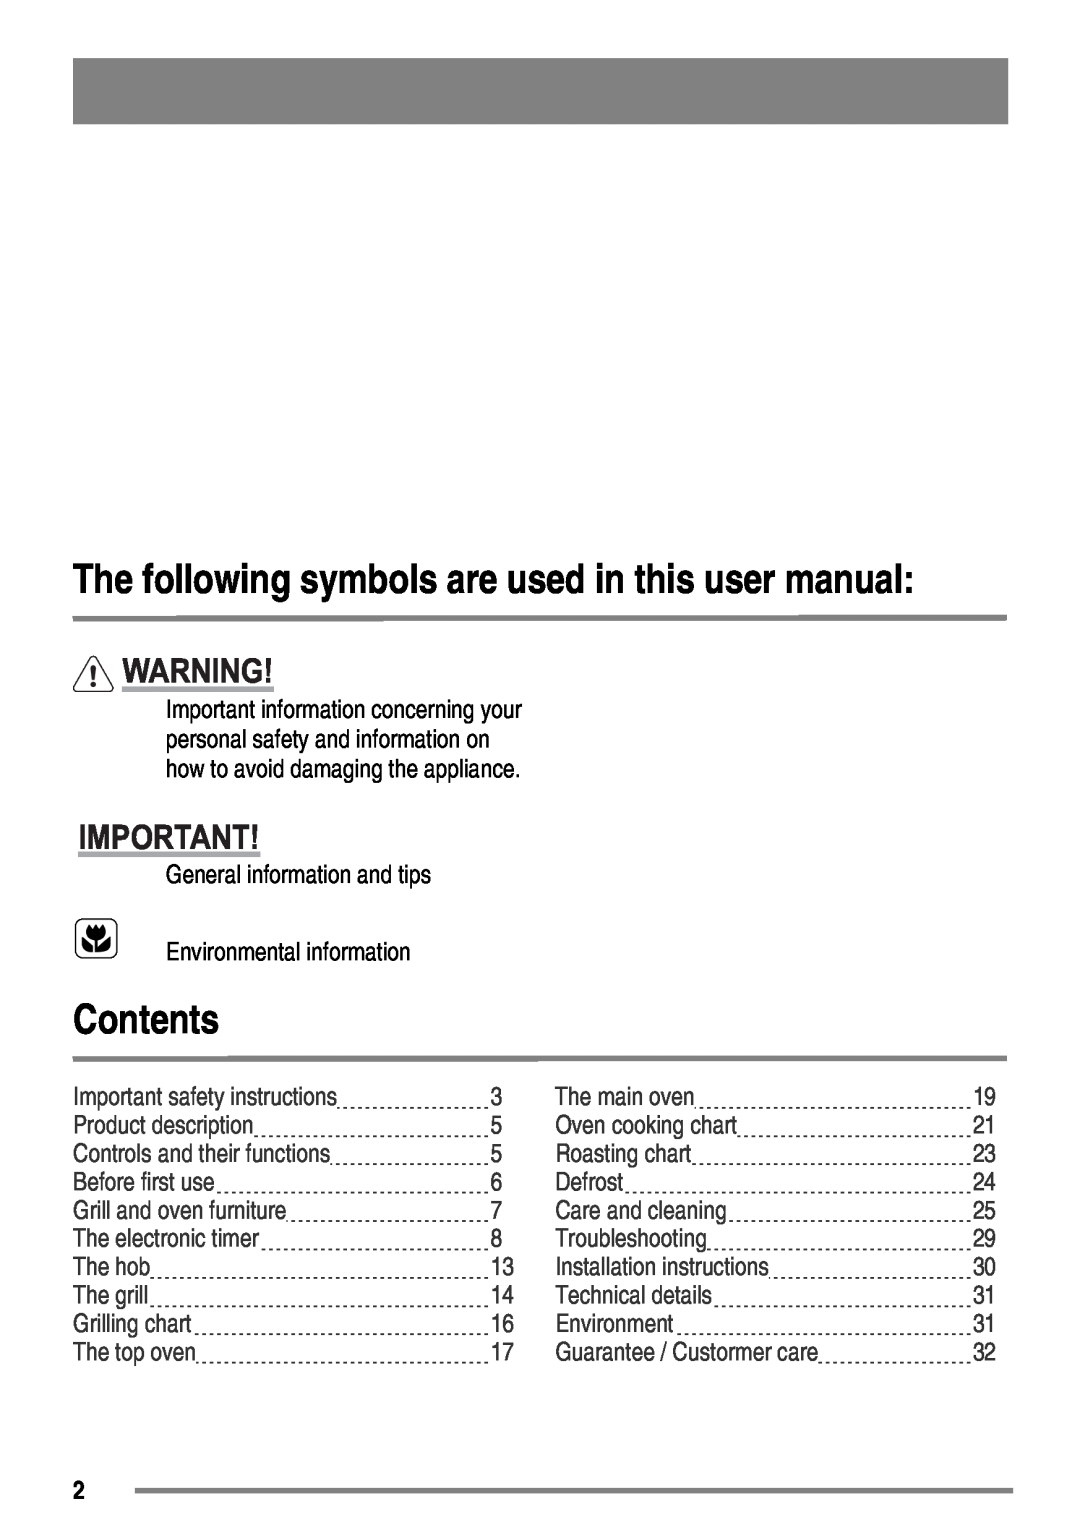 Zanussi ZKC5030 Contents, The following symbols are used in this user manual 